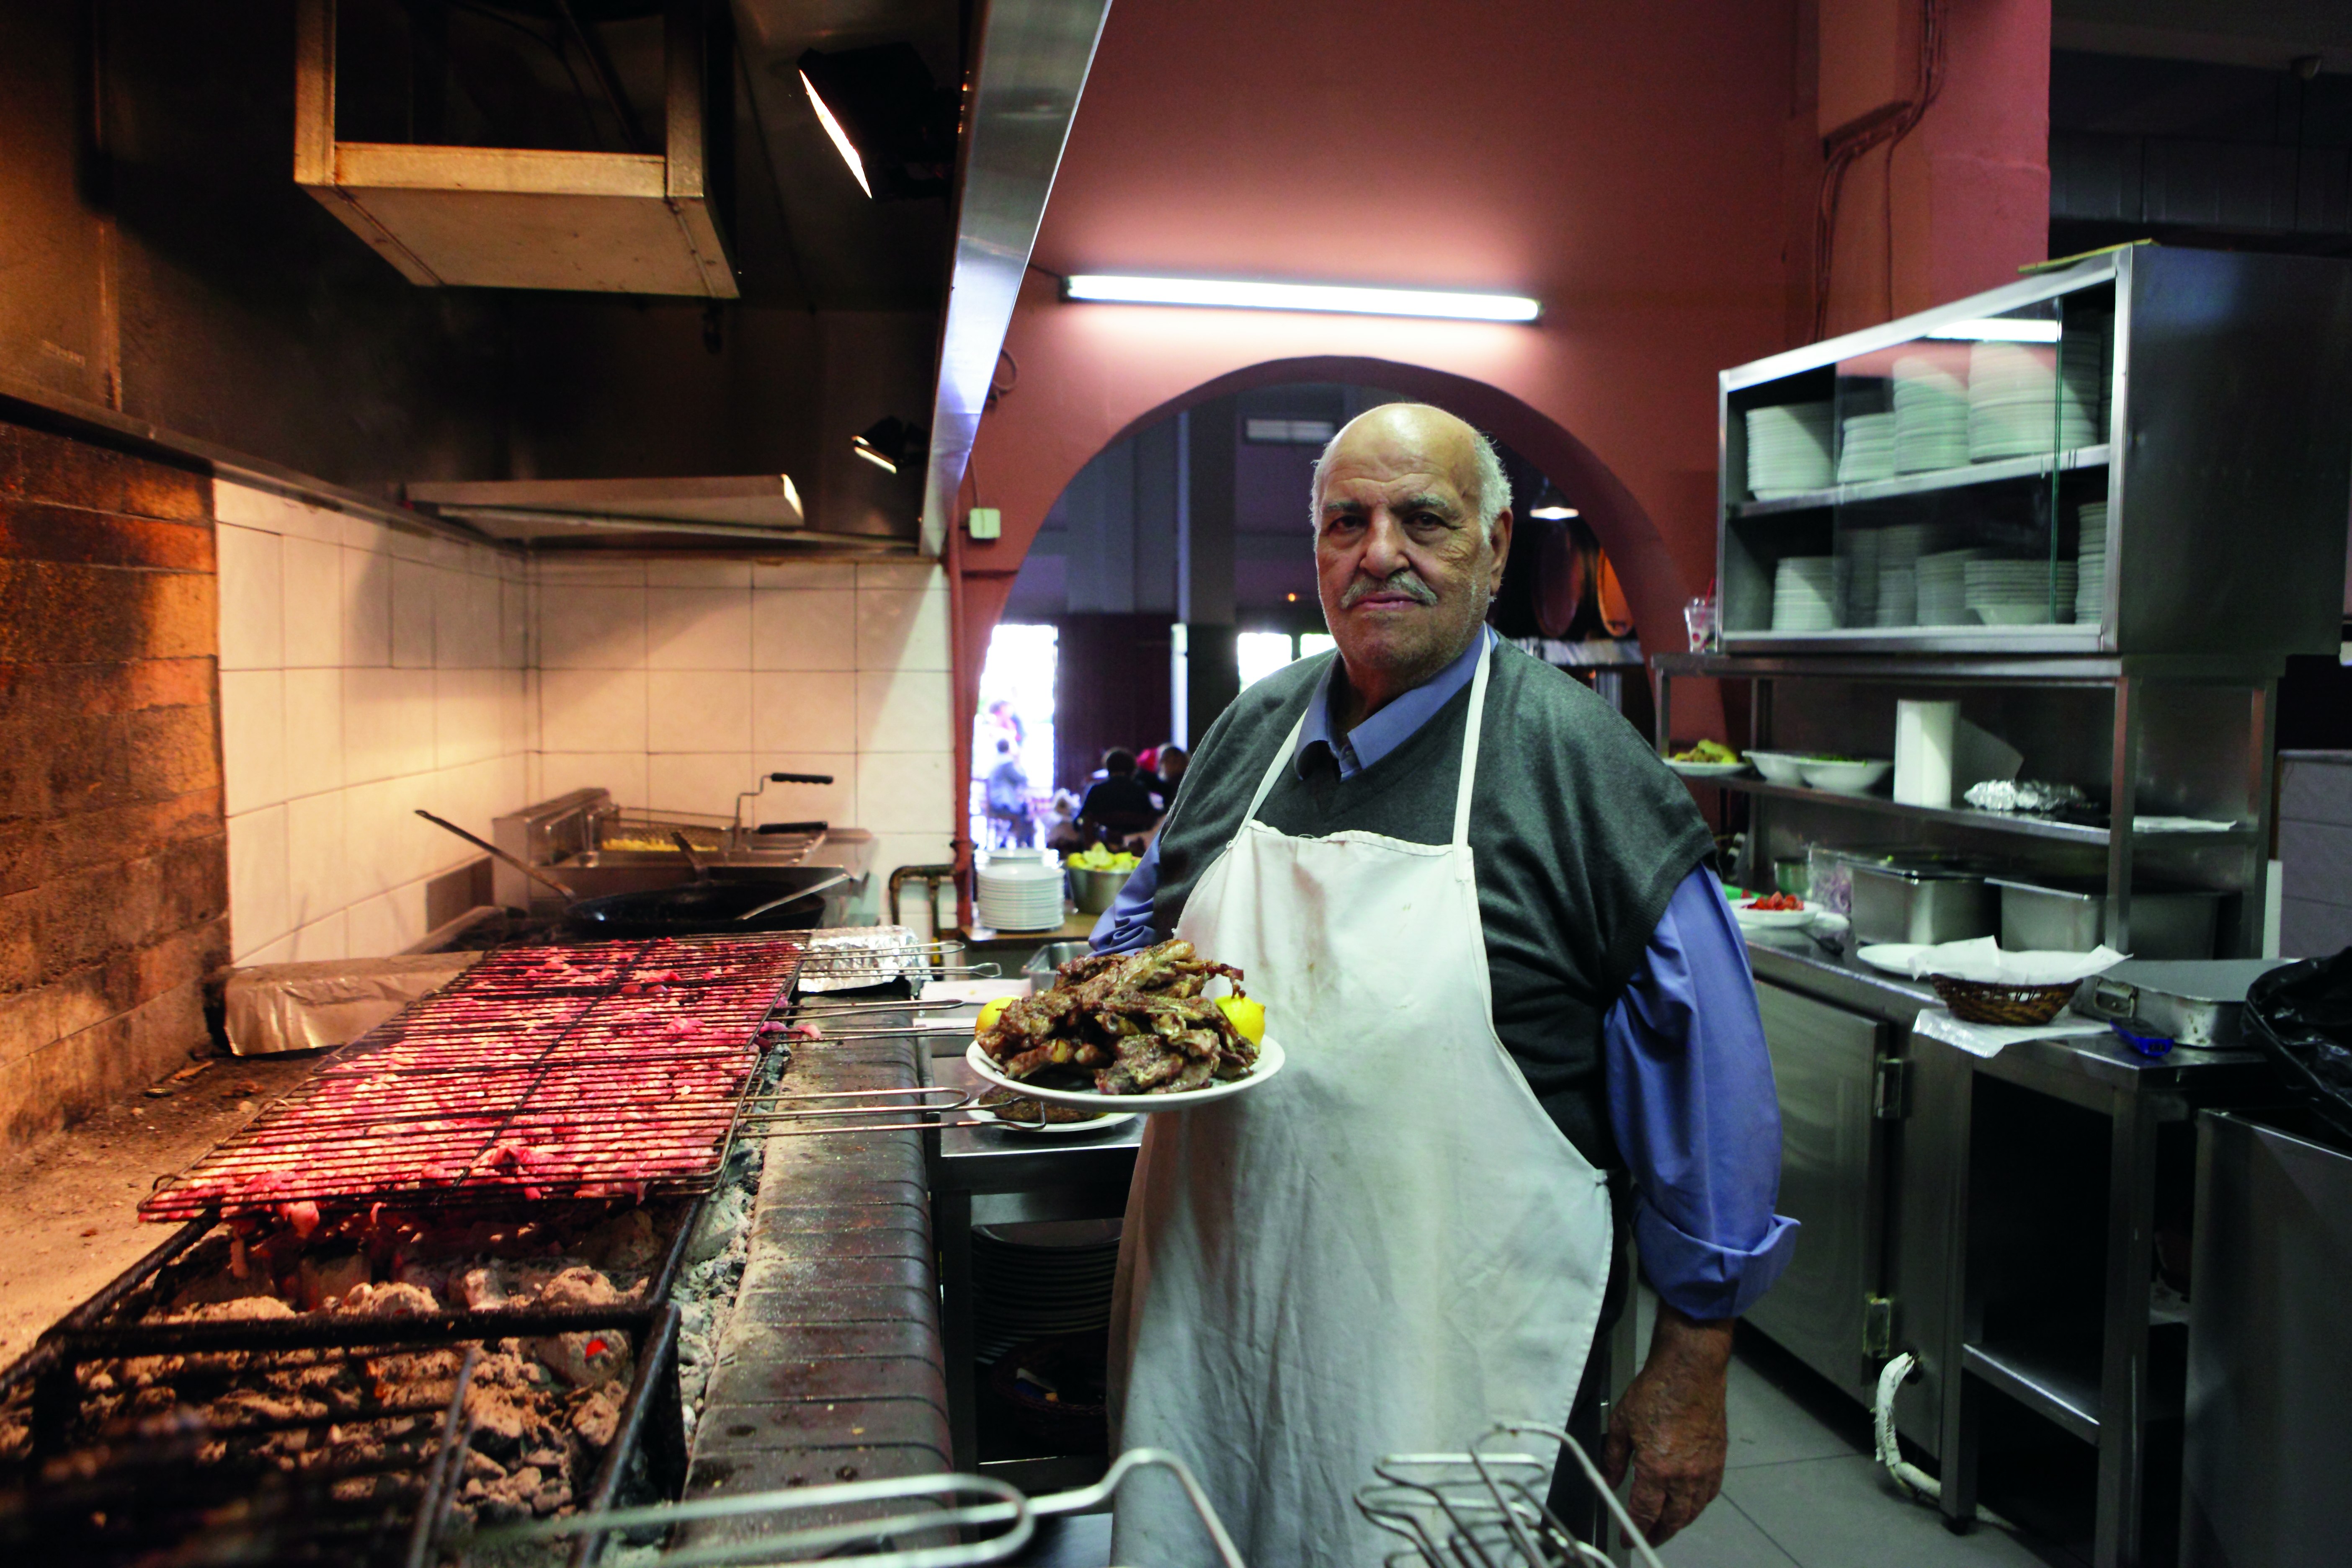 The cook at To Steki Tou Elia holds a plate of grilled meat garnished with lemon in front of massive wood-fired grills in the restaurant kitchen. He wears a blue button-down shirt covered with a sweater vest and a white apron. He looks at the camera with a proud expression.